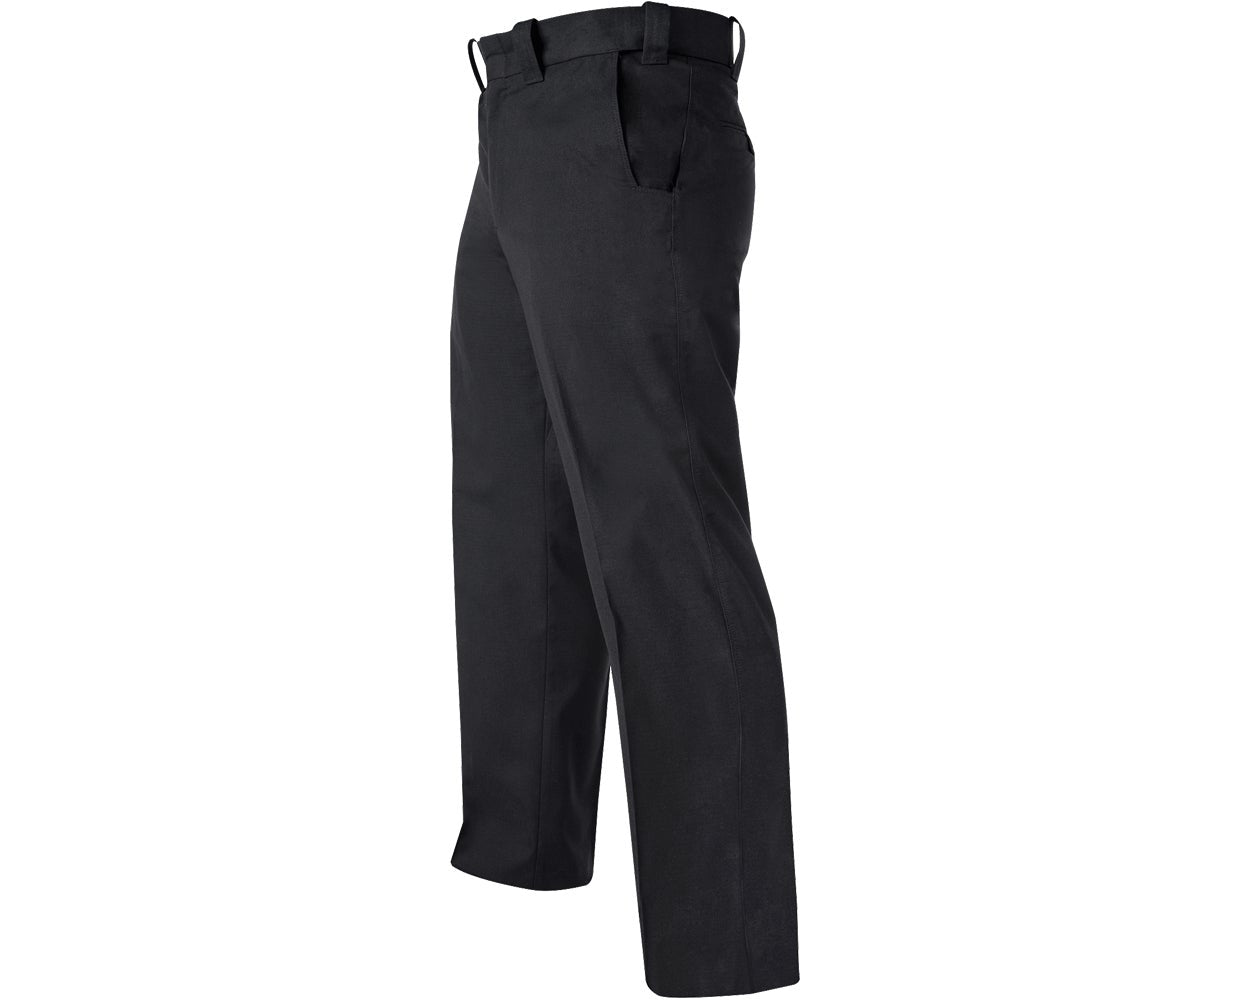 Flying Cross FX STAT Men's Class A Uniform Pants with 4 Pockets FX77200 - Newest Products